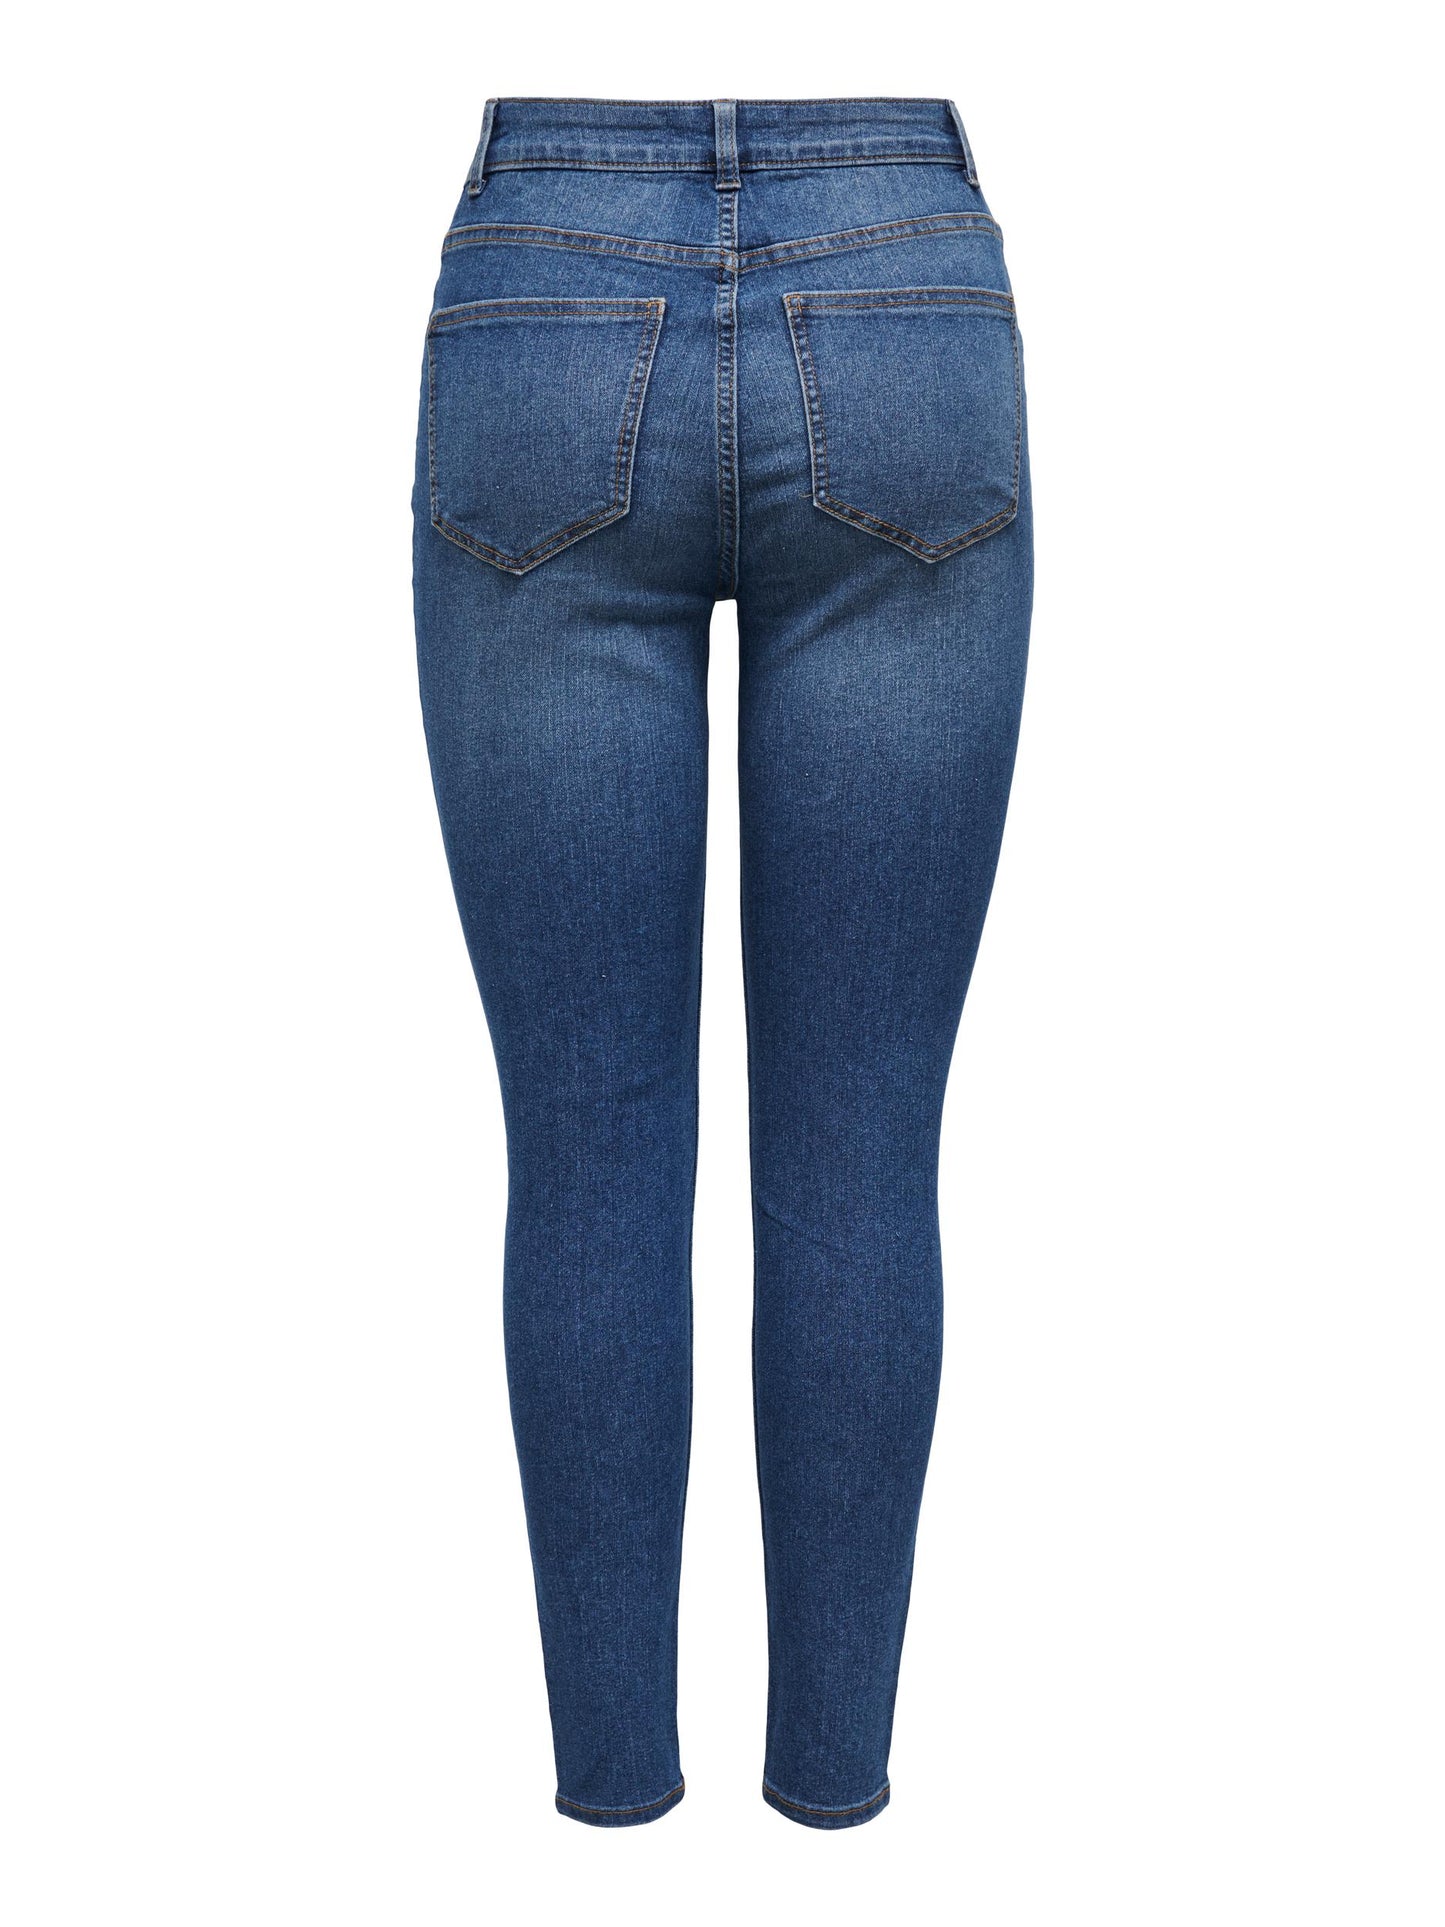 High waisted ankle jeans